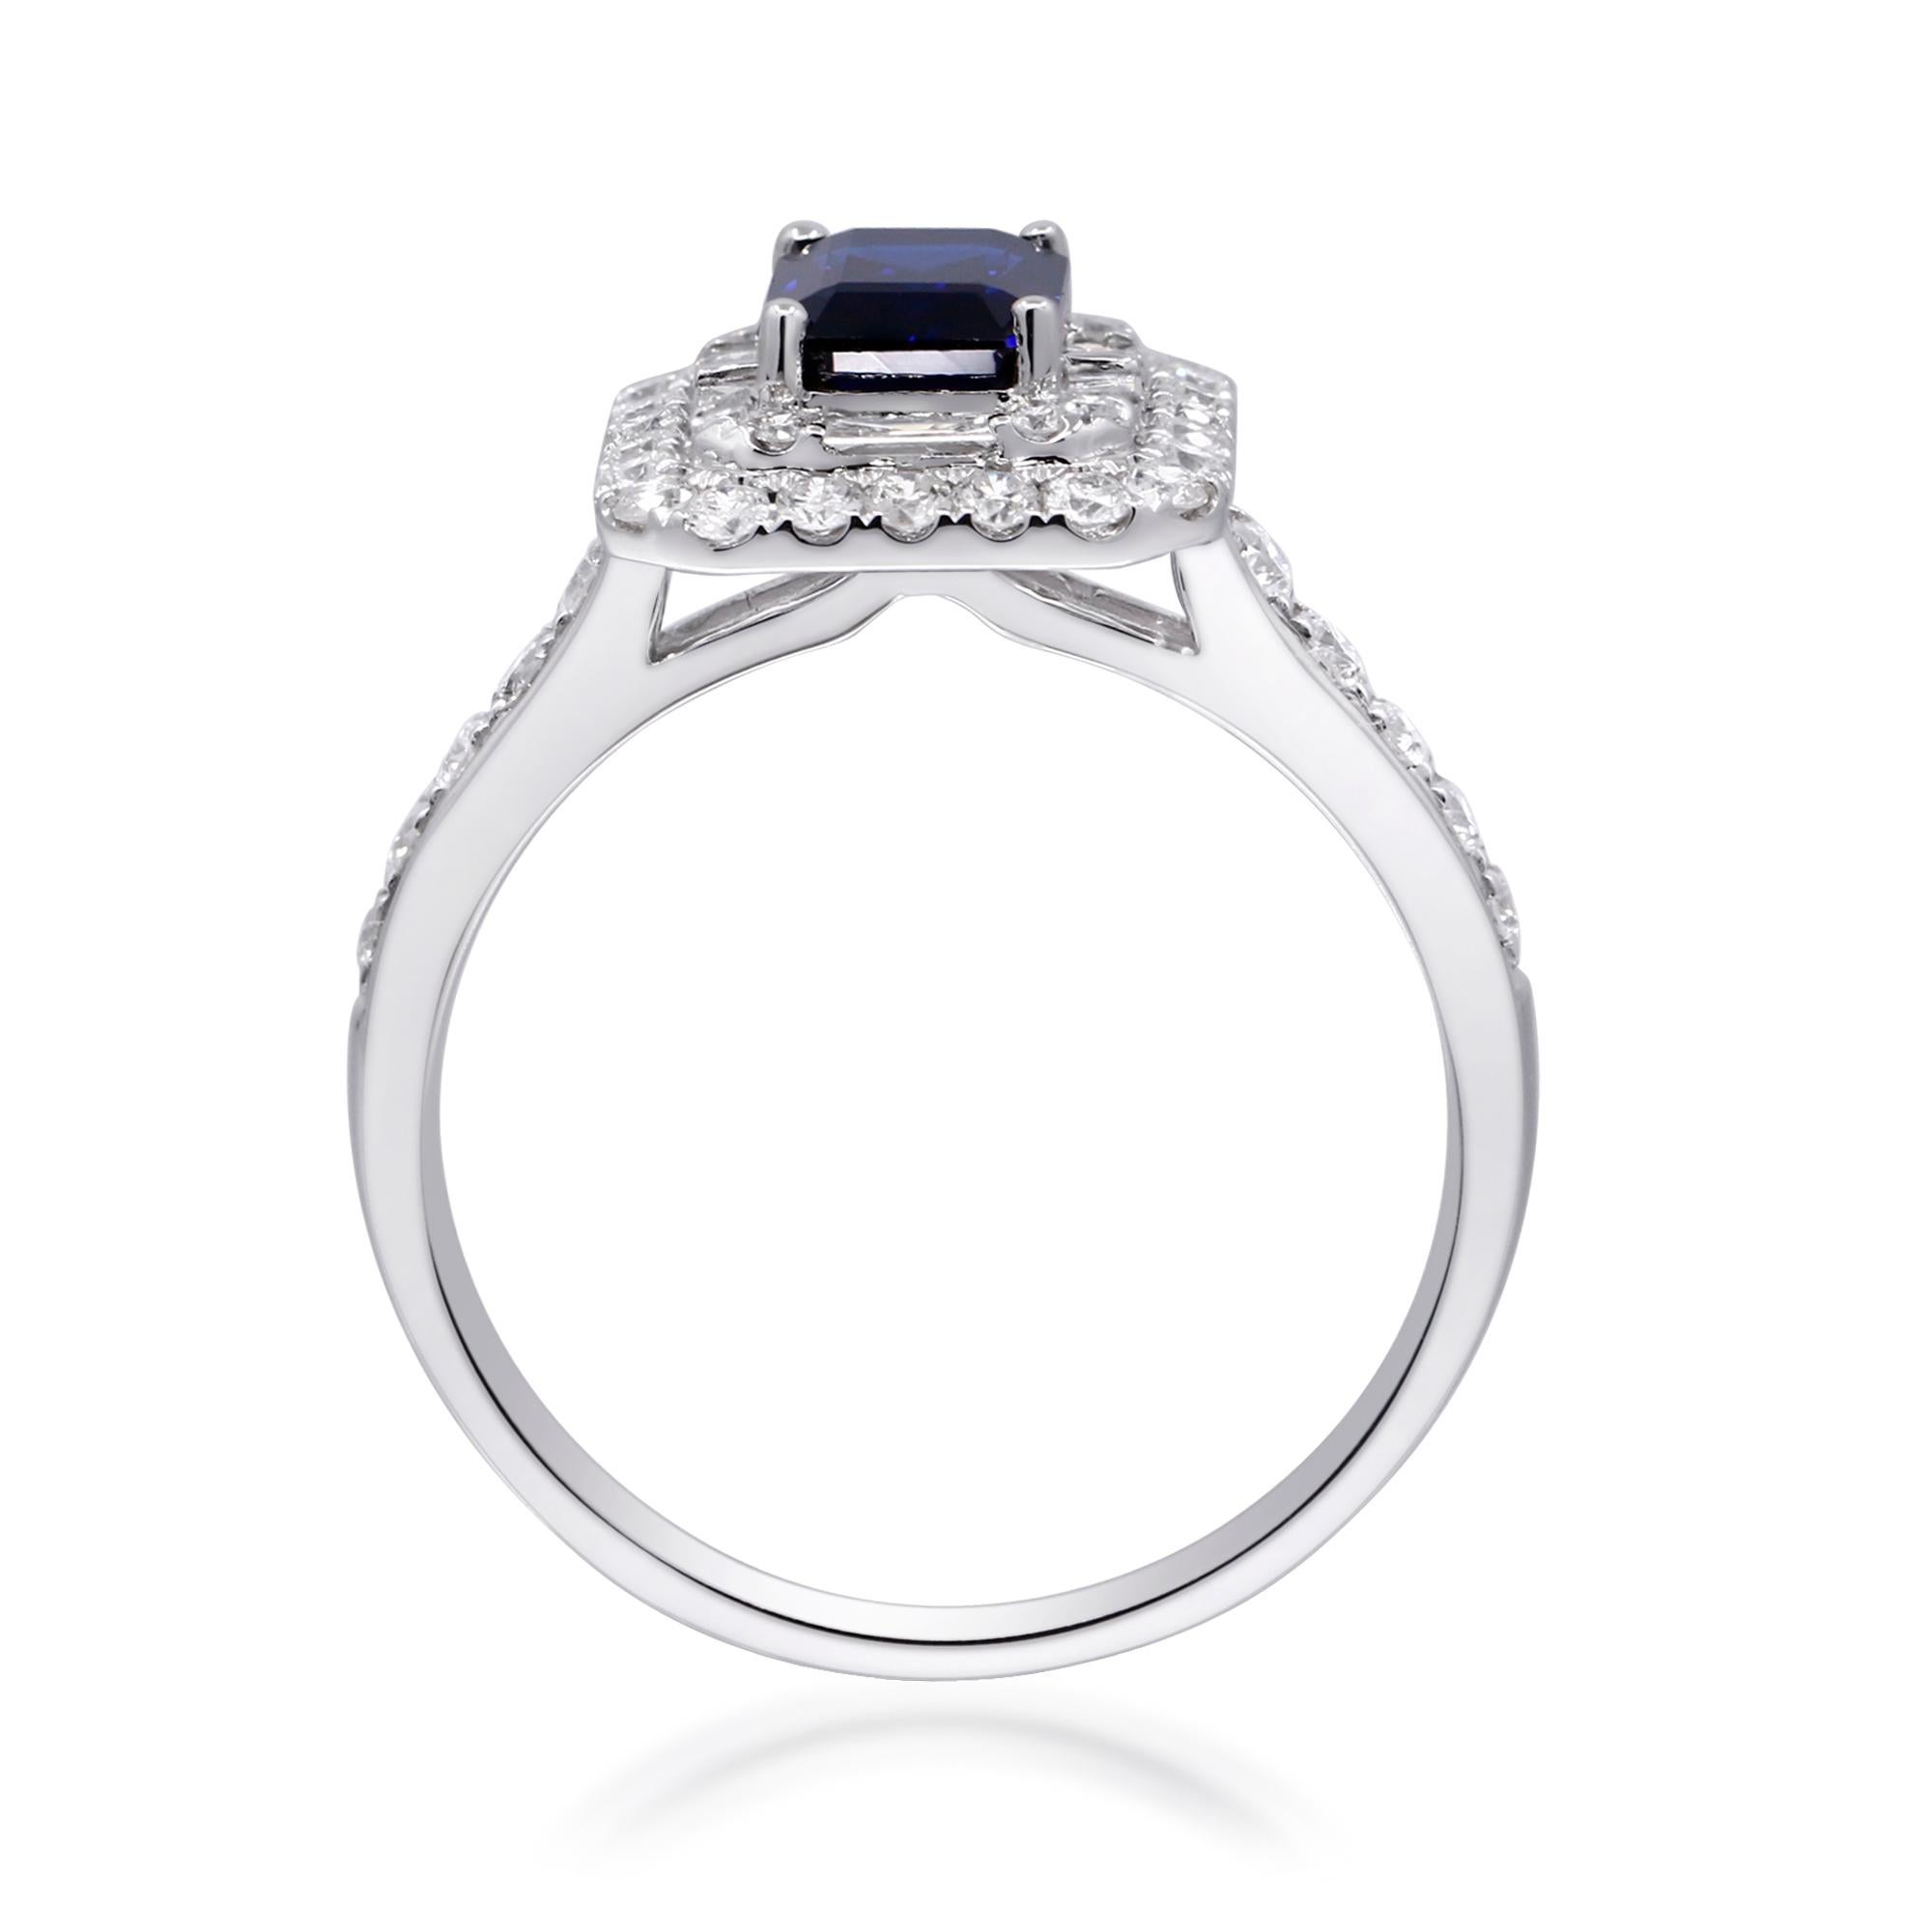 Emerald Cut 1.18 Carat Emerald-Cut Blue Sapphire with Diamond Accents 10K White Gold Ring For Sale